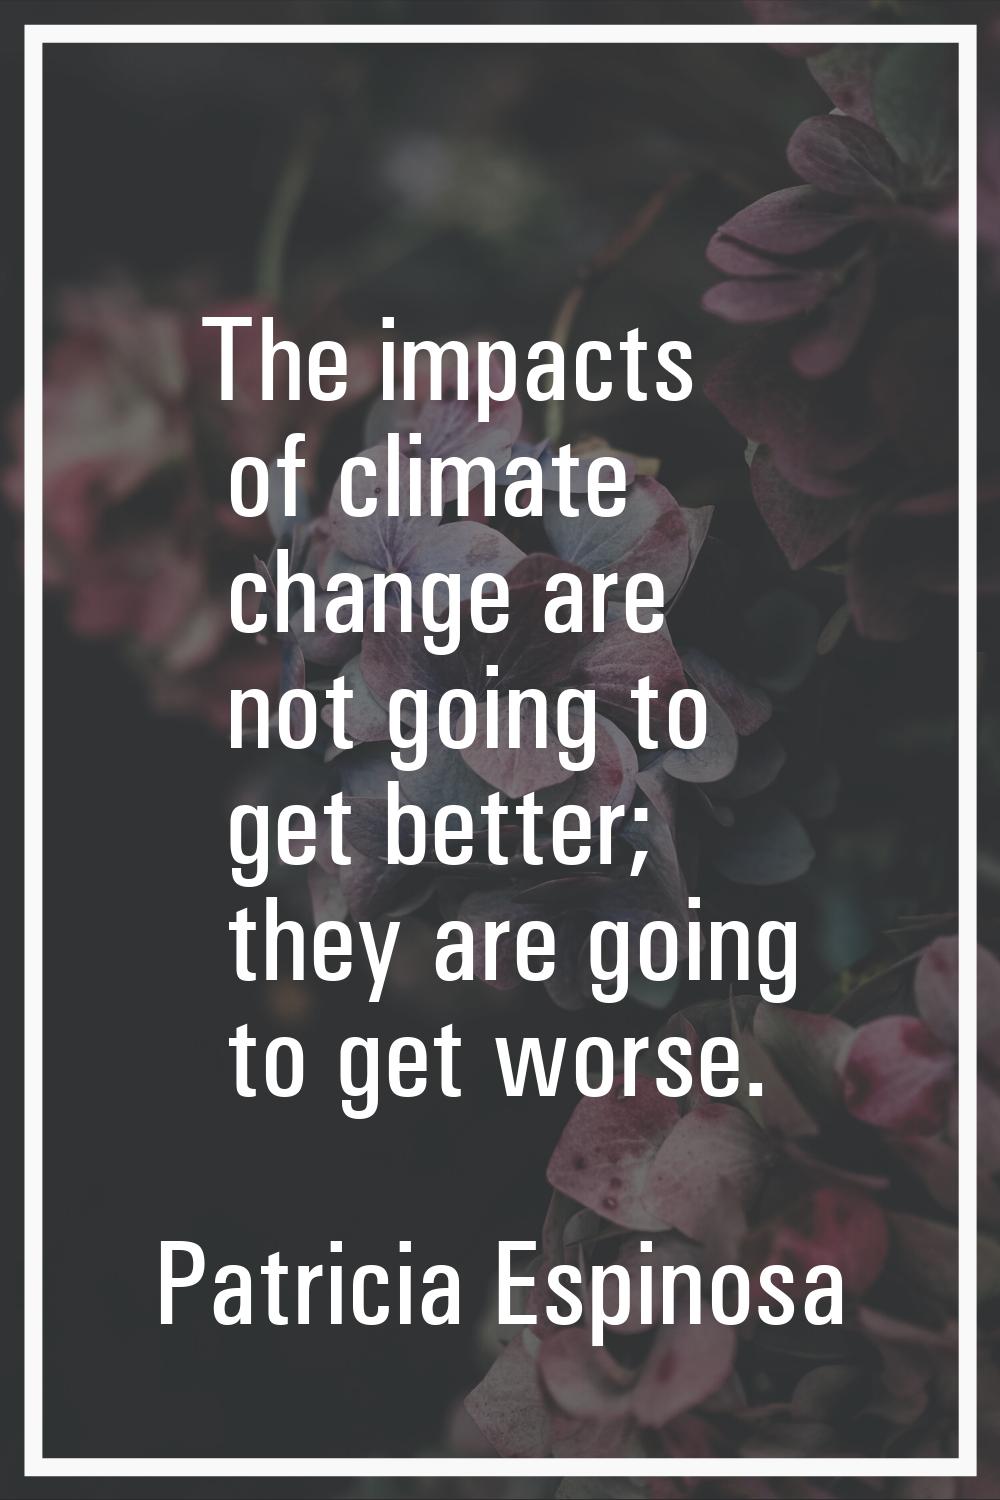 The impacts of climate change are not going to get better; they are going to get worse.